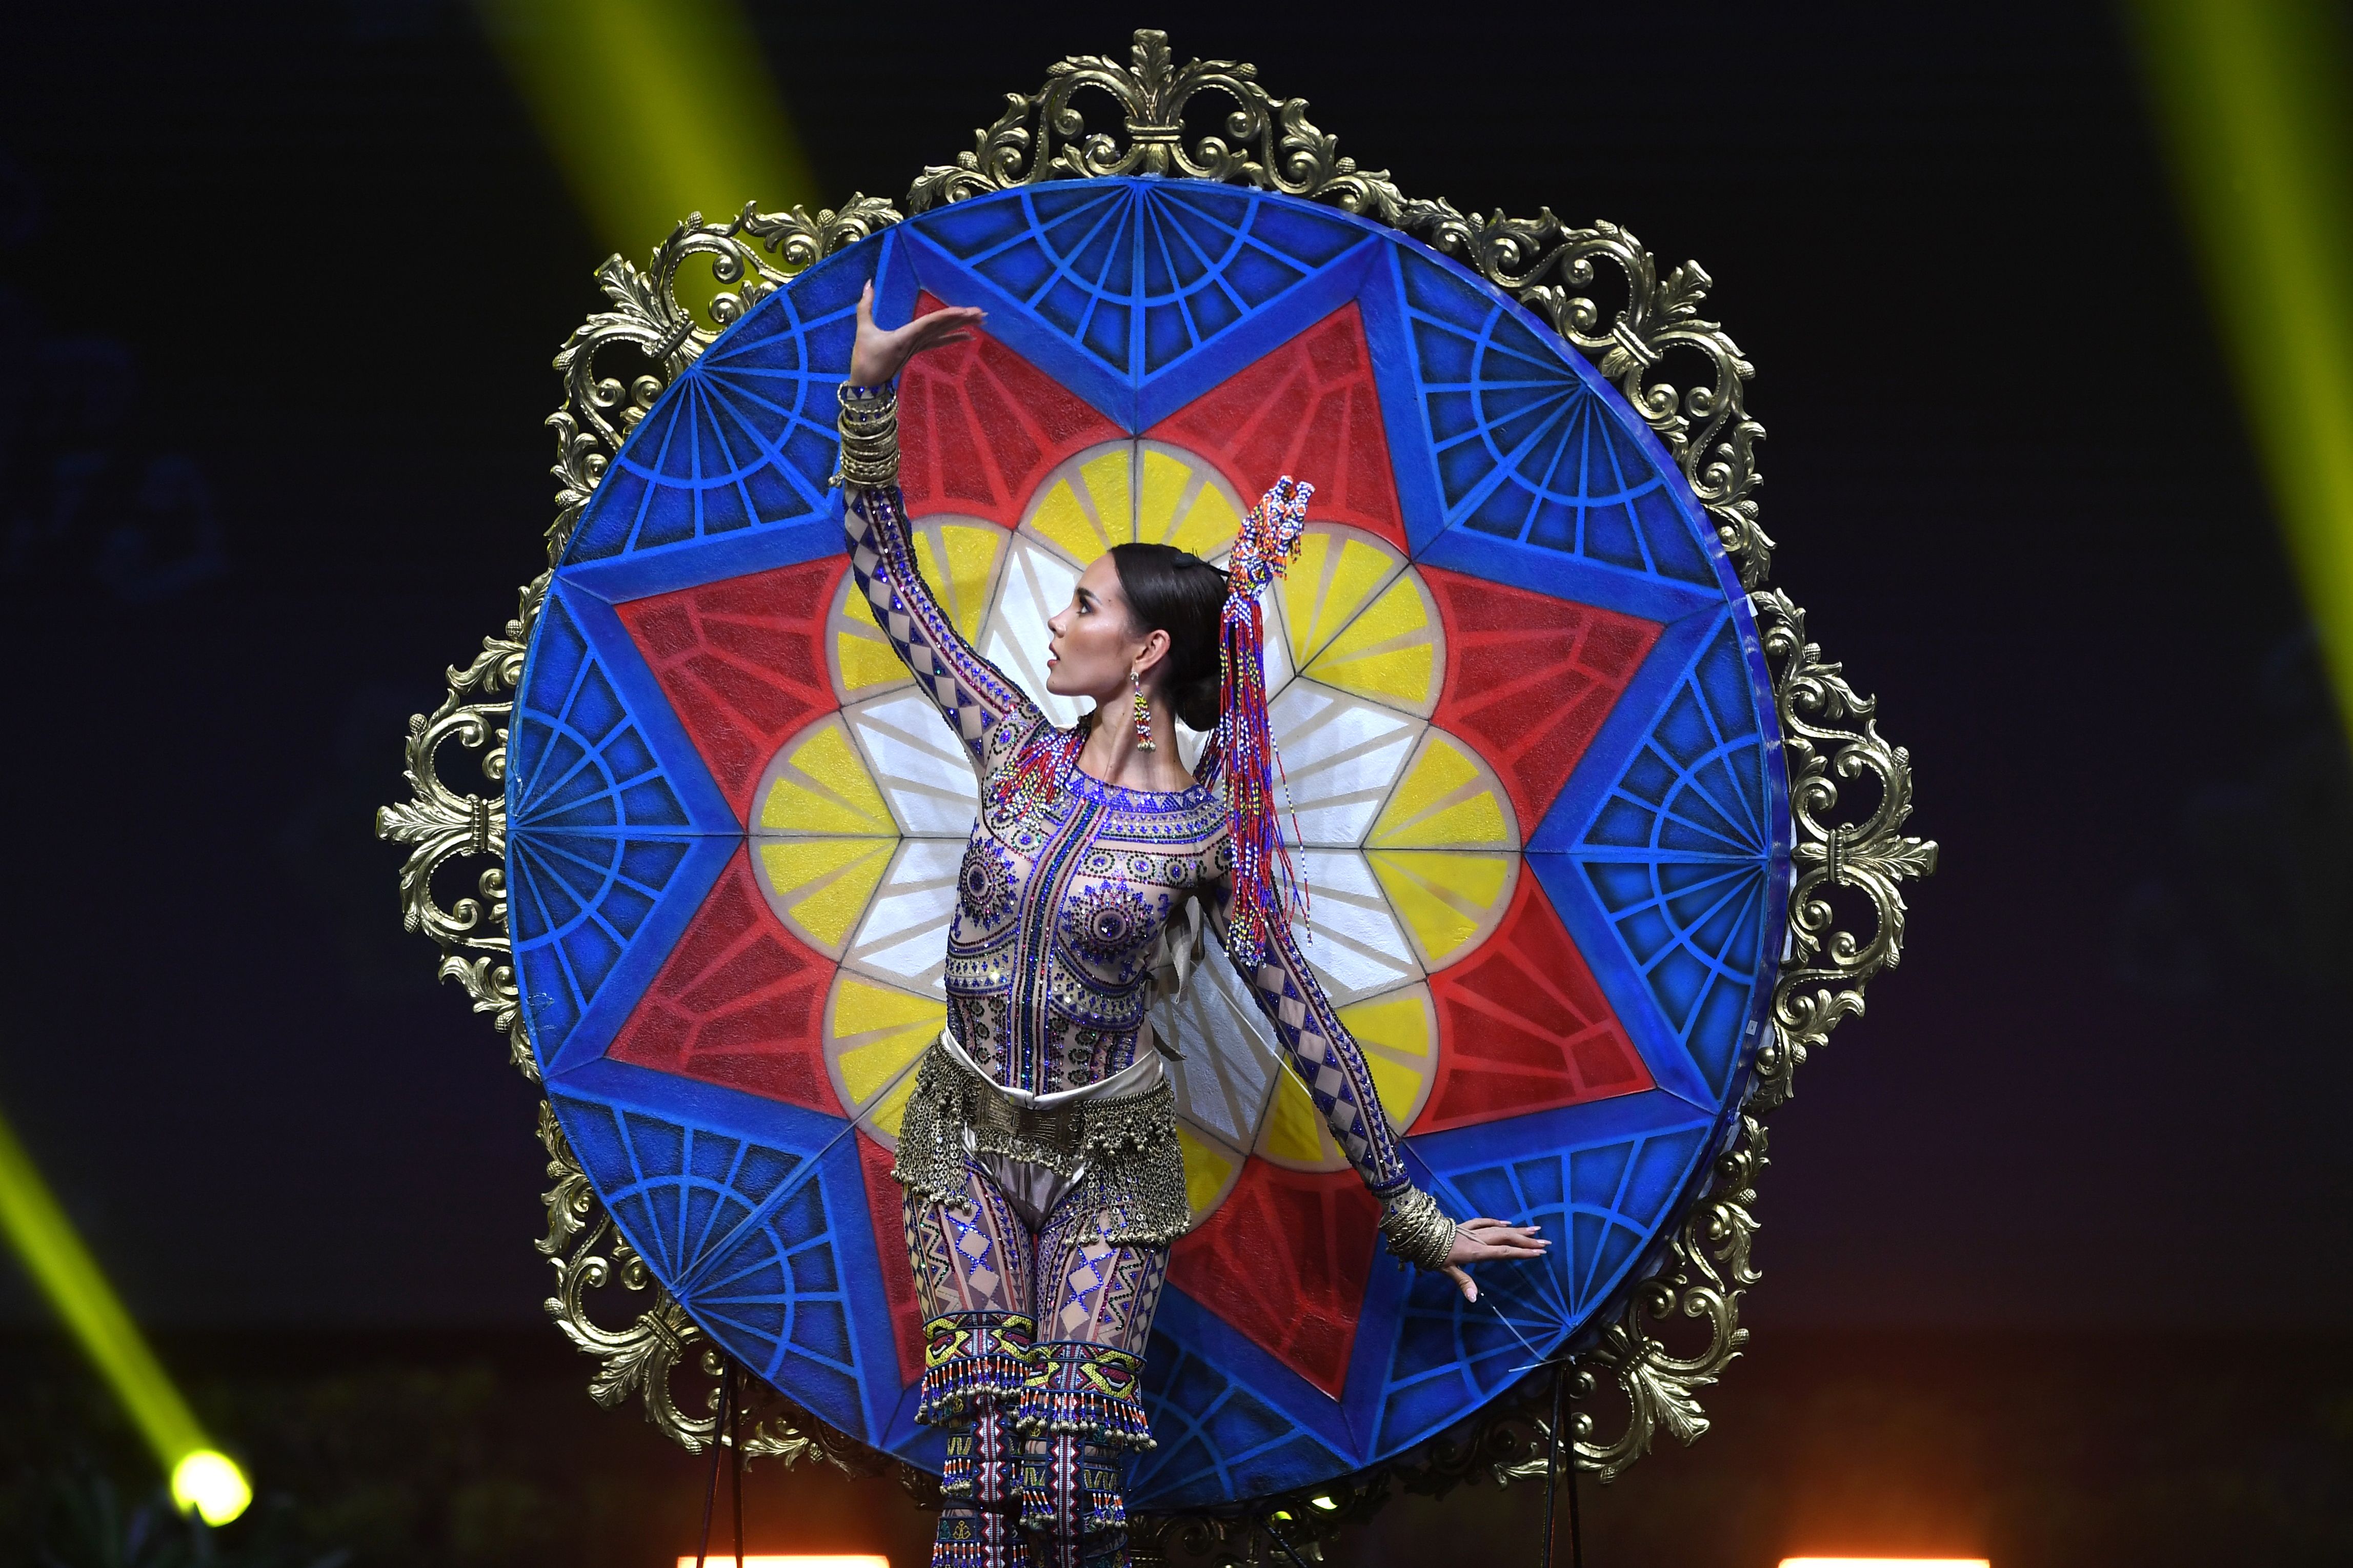 Who Is Miss Philippines? Here's 8 Things About The Miss Universe Winner